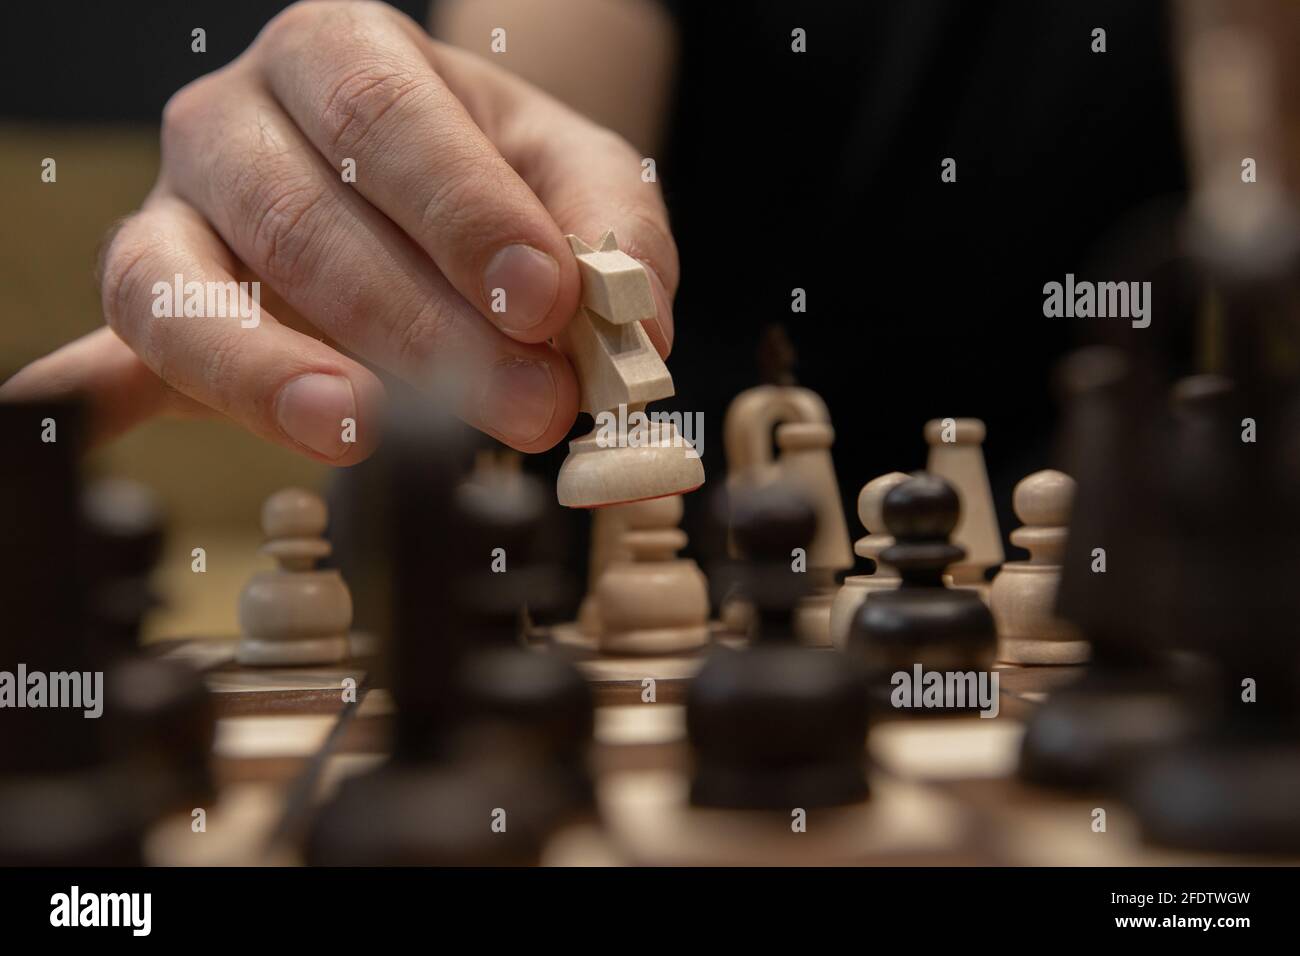 Hand taking next step on chess game. Human hand moving wooden white knight piece Stock Photo